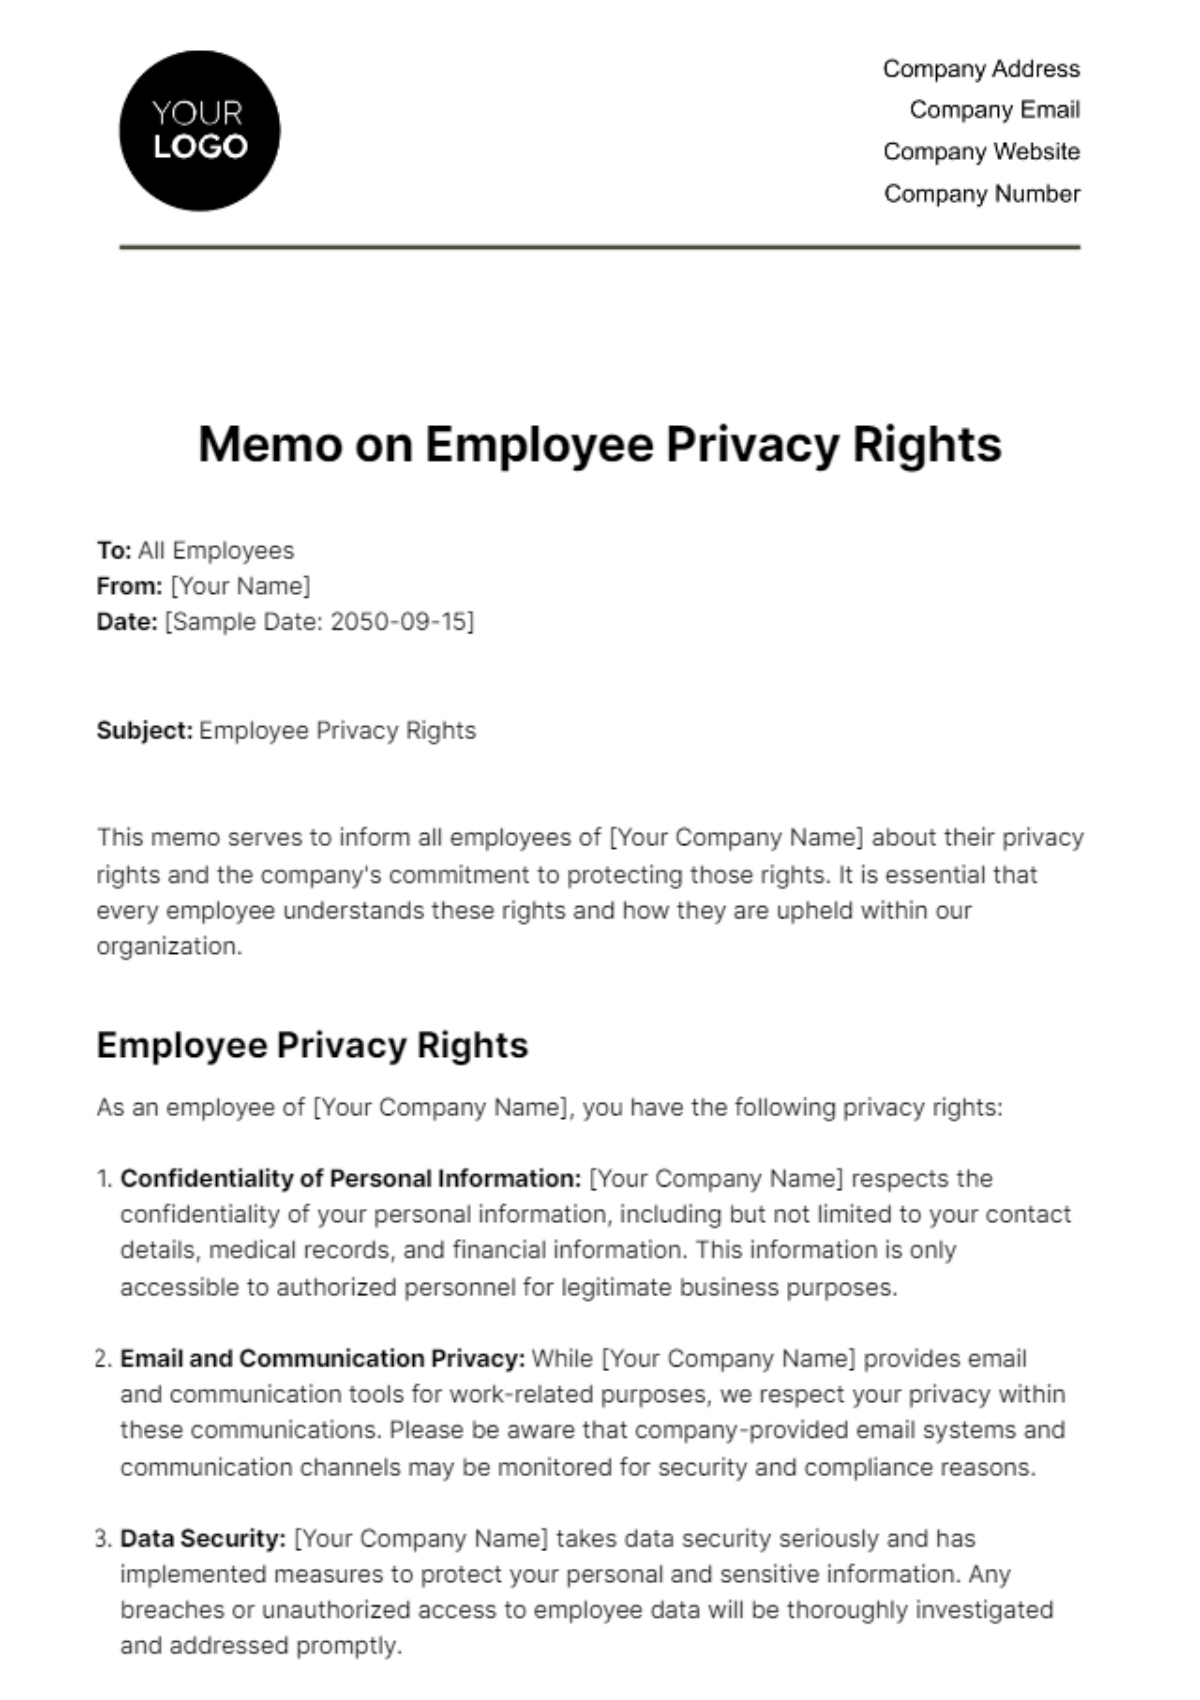 Free Memo on Employee Privacy Rights HR Template